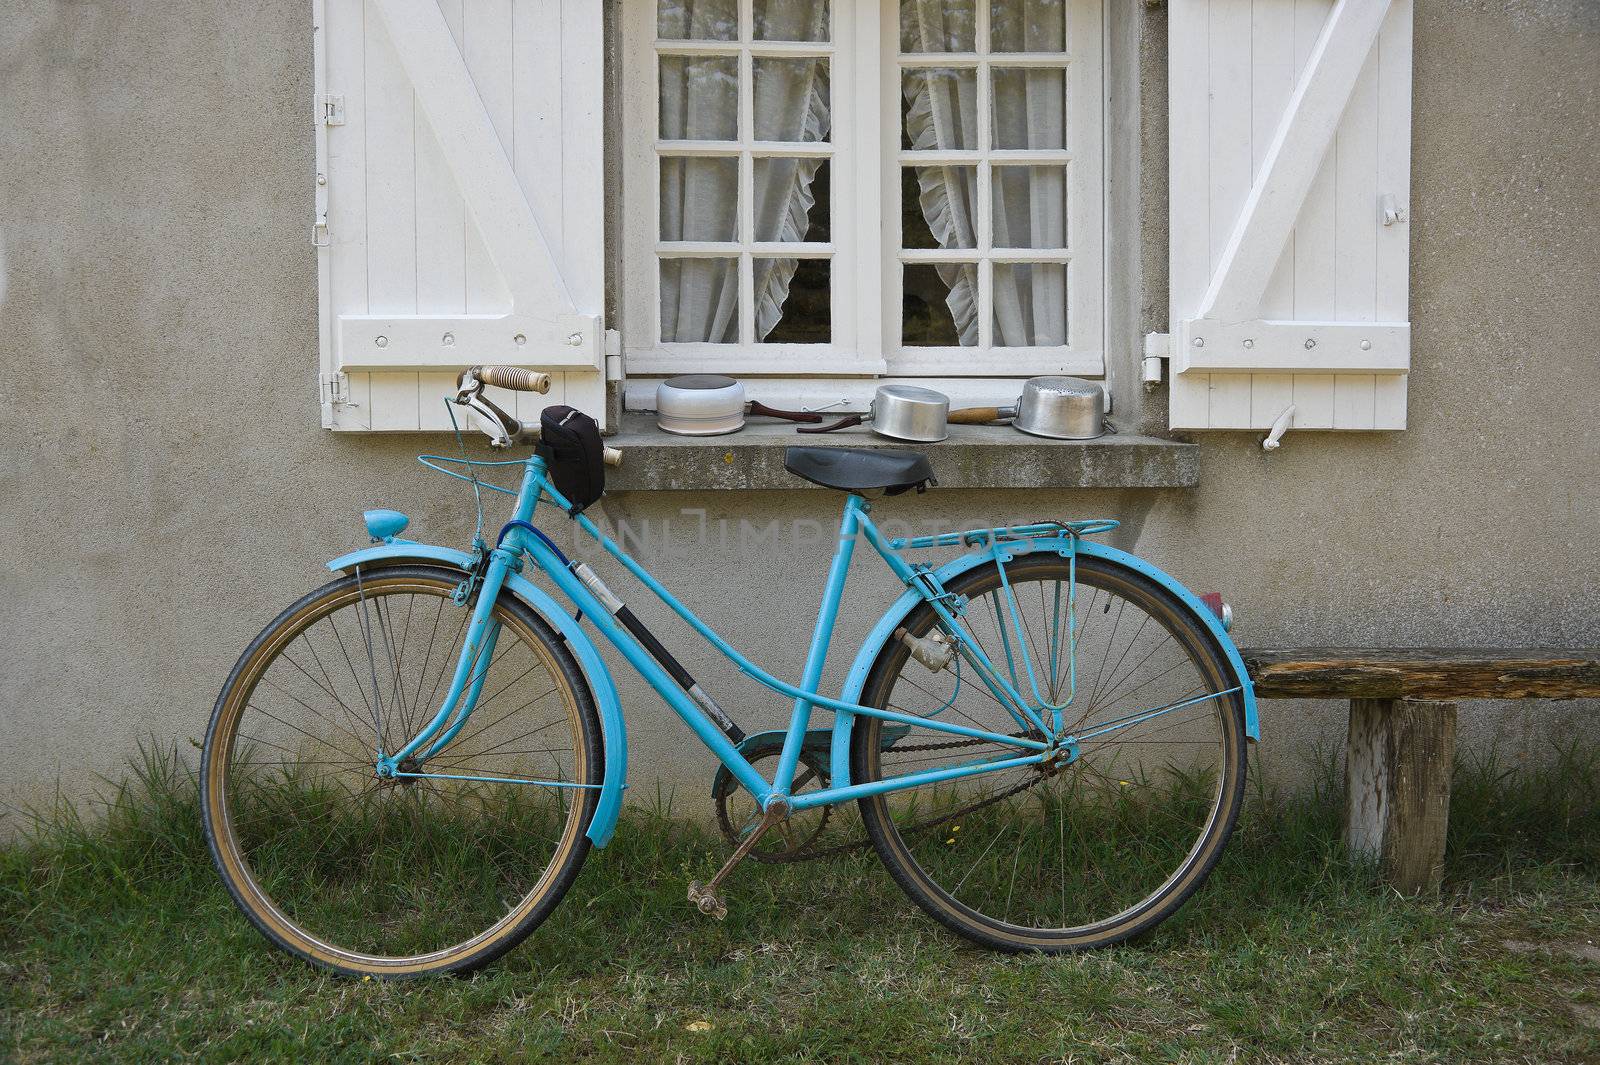 Old blue french bicycle in front of window